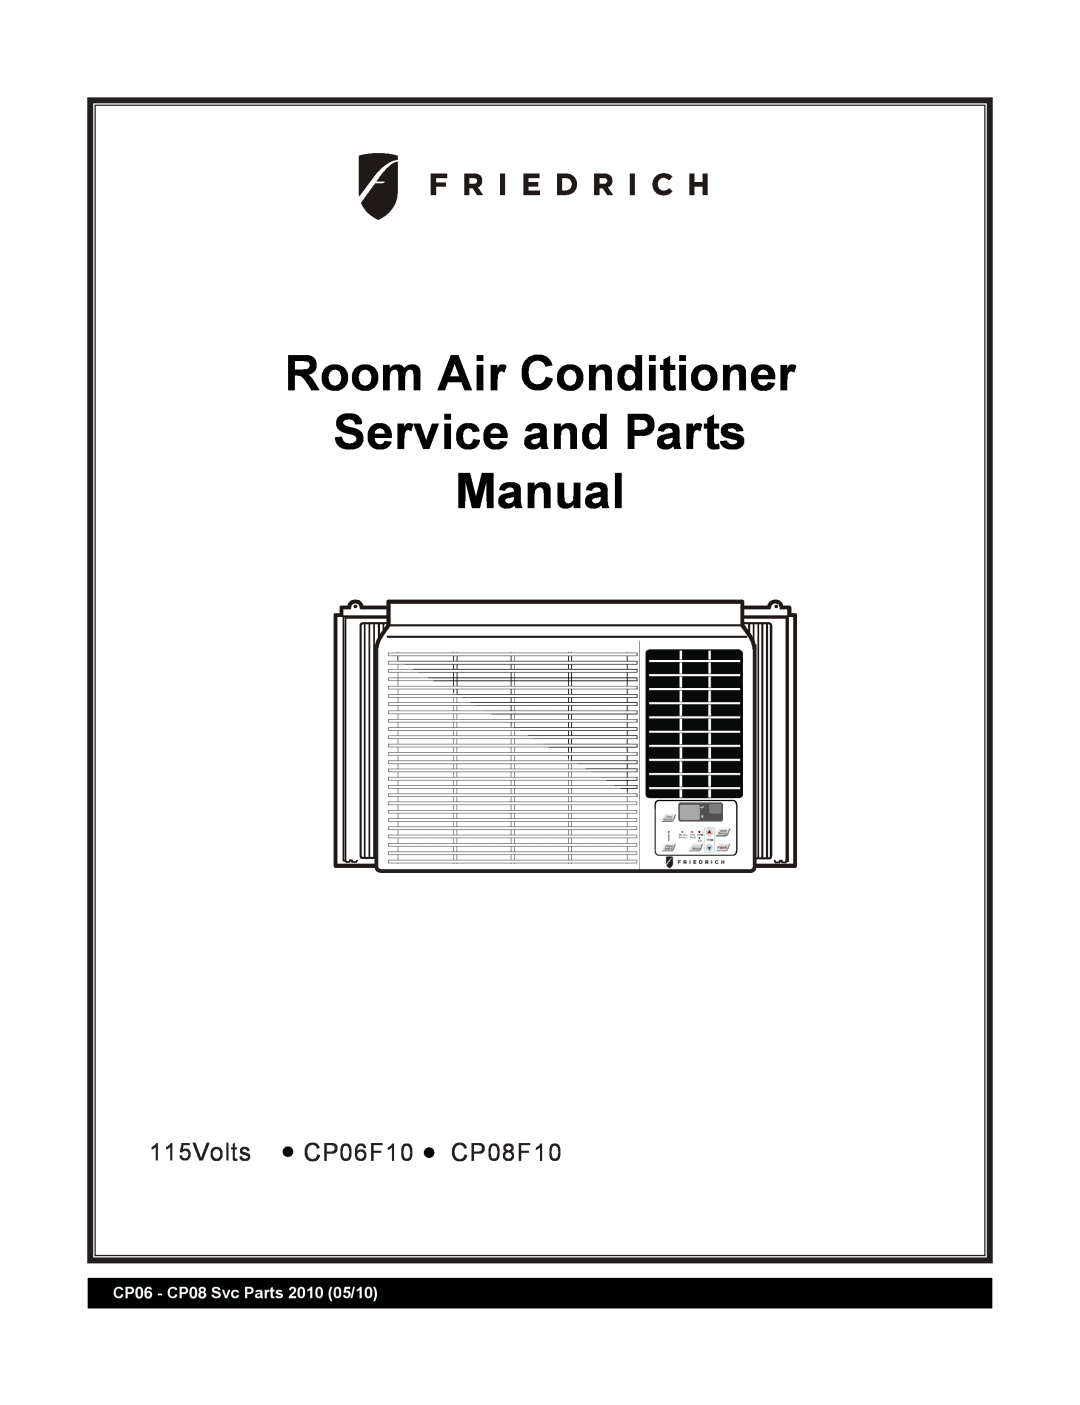 Friedrich manual Room Air Conditioner Service and Parts Manual, 115Volts CP06F10 CP08F10, Speed, Auto, Money, Fan Cool 